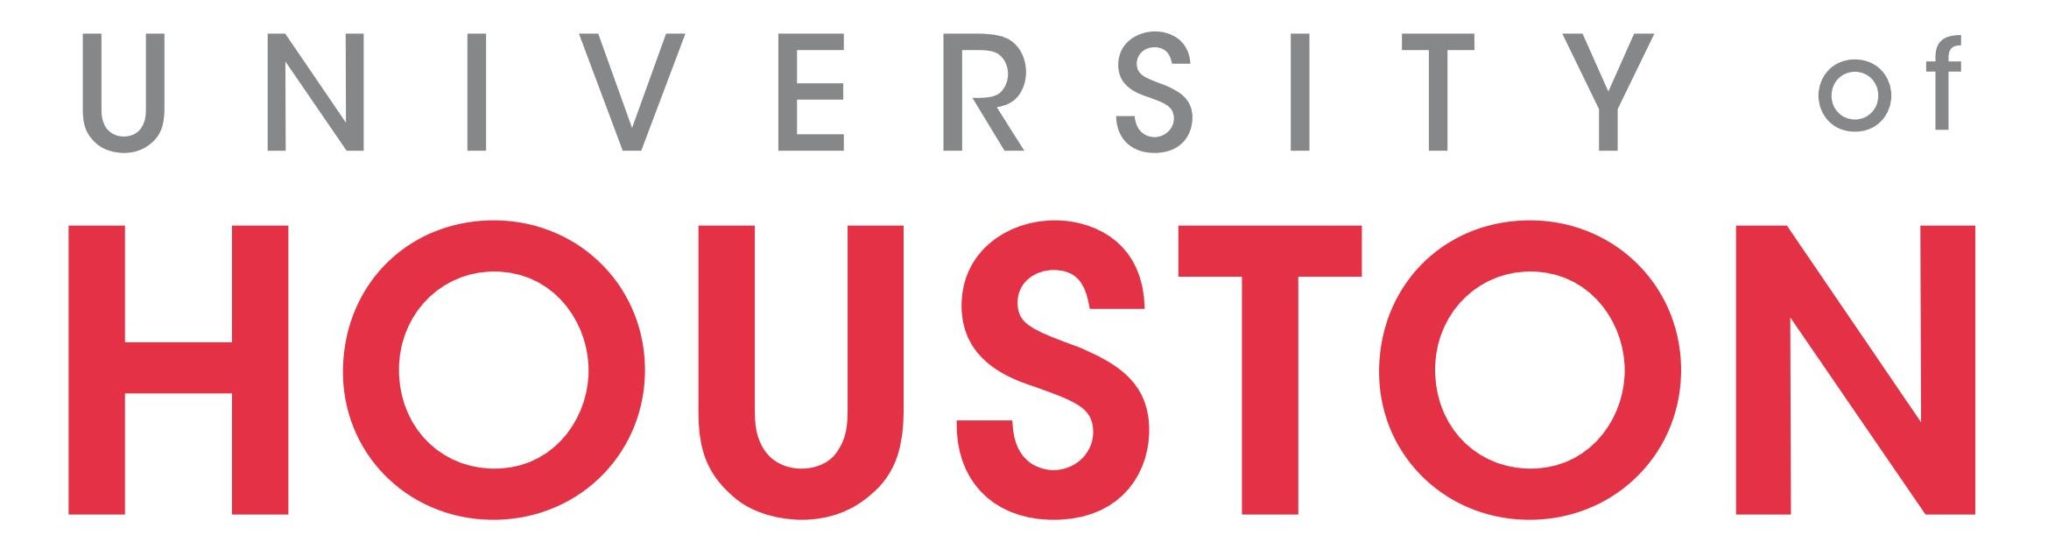 University of Houston Master of Science in Statistics and Data Science (M.S.) - Hybrid